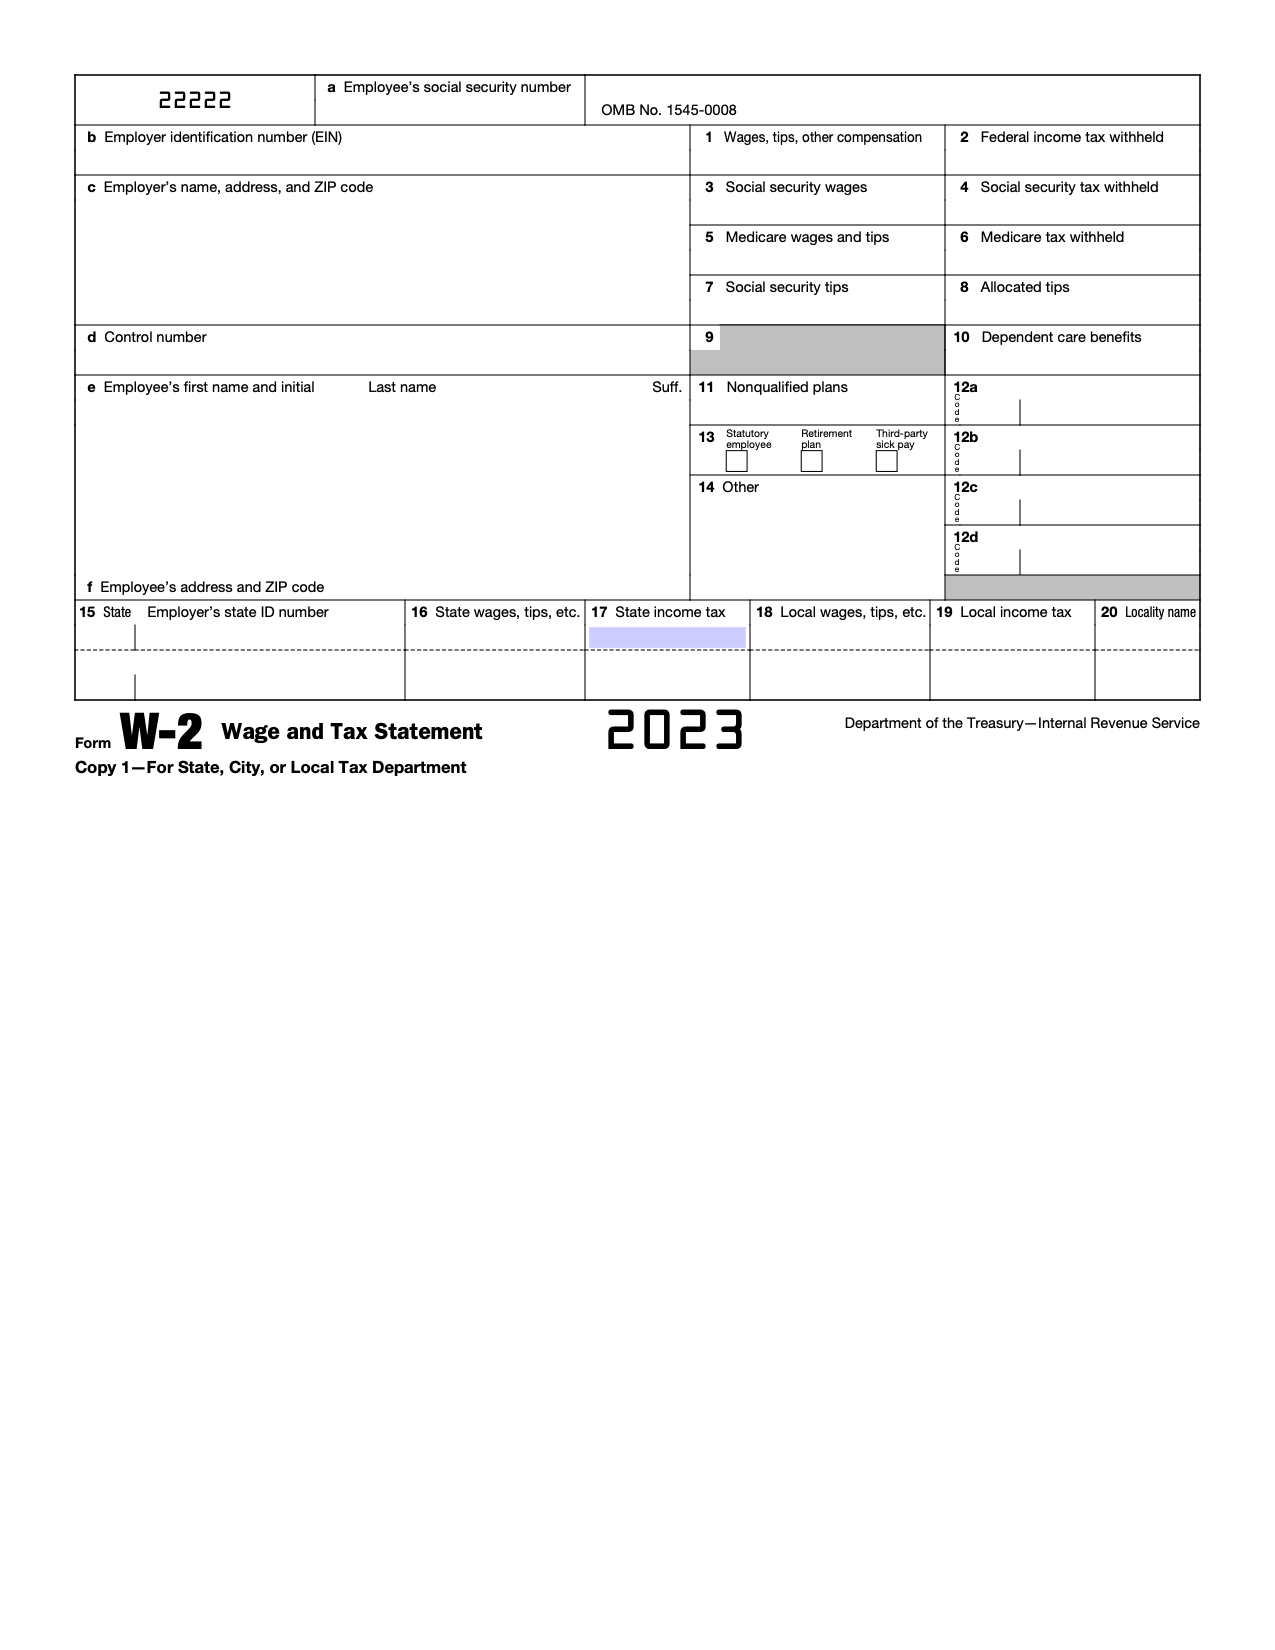 Free Irs Form W-2 | Wage And Tax Statement - Pdf – Eforms pertaining to Irs W2 Form 2022 Pdf